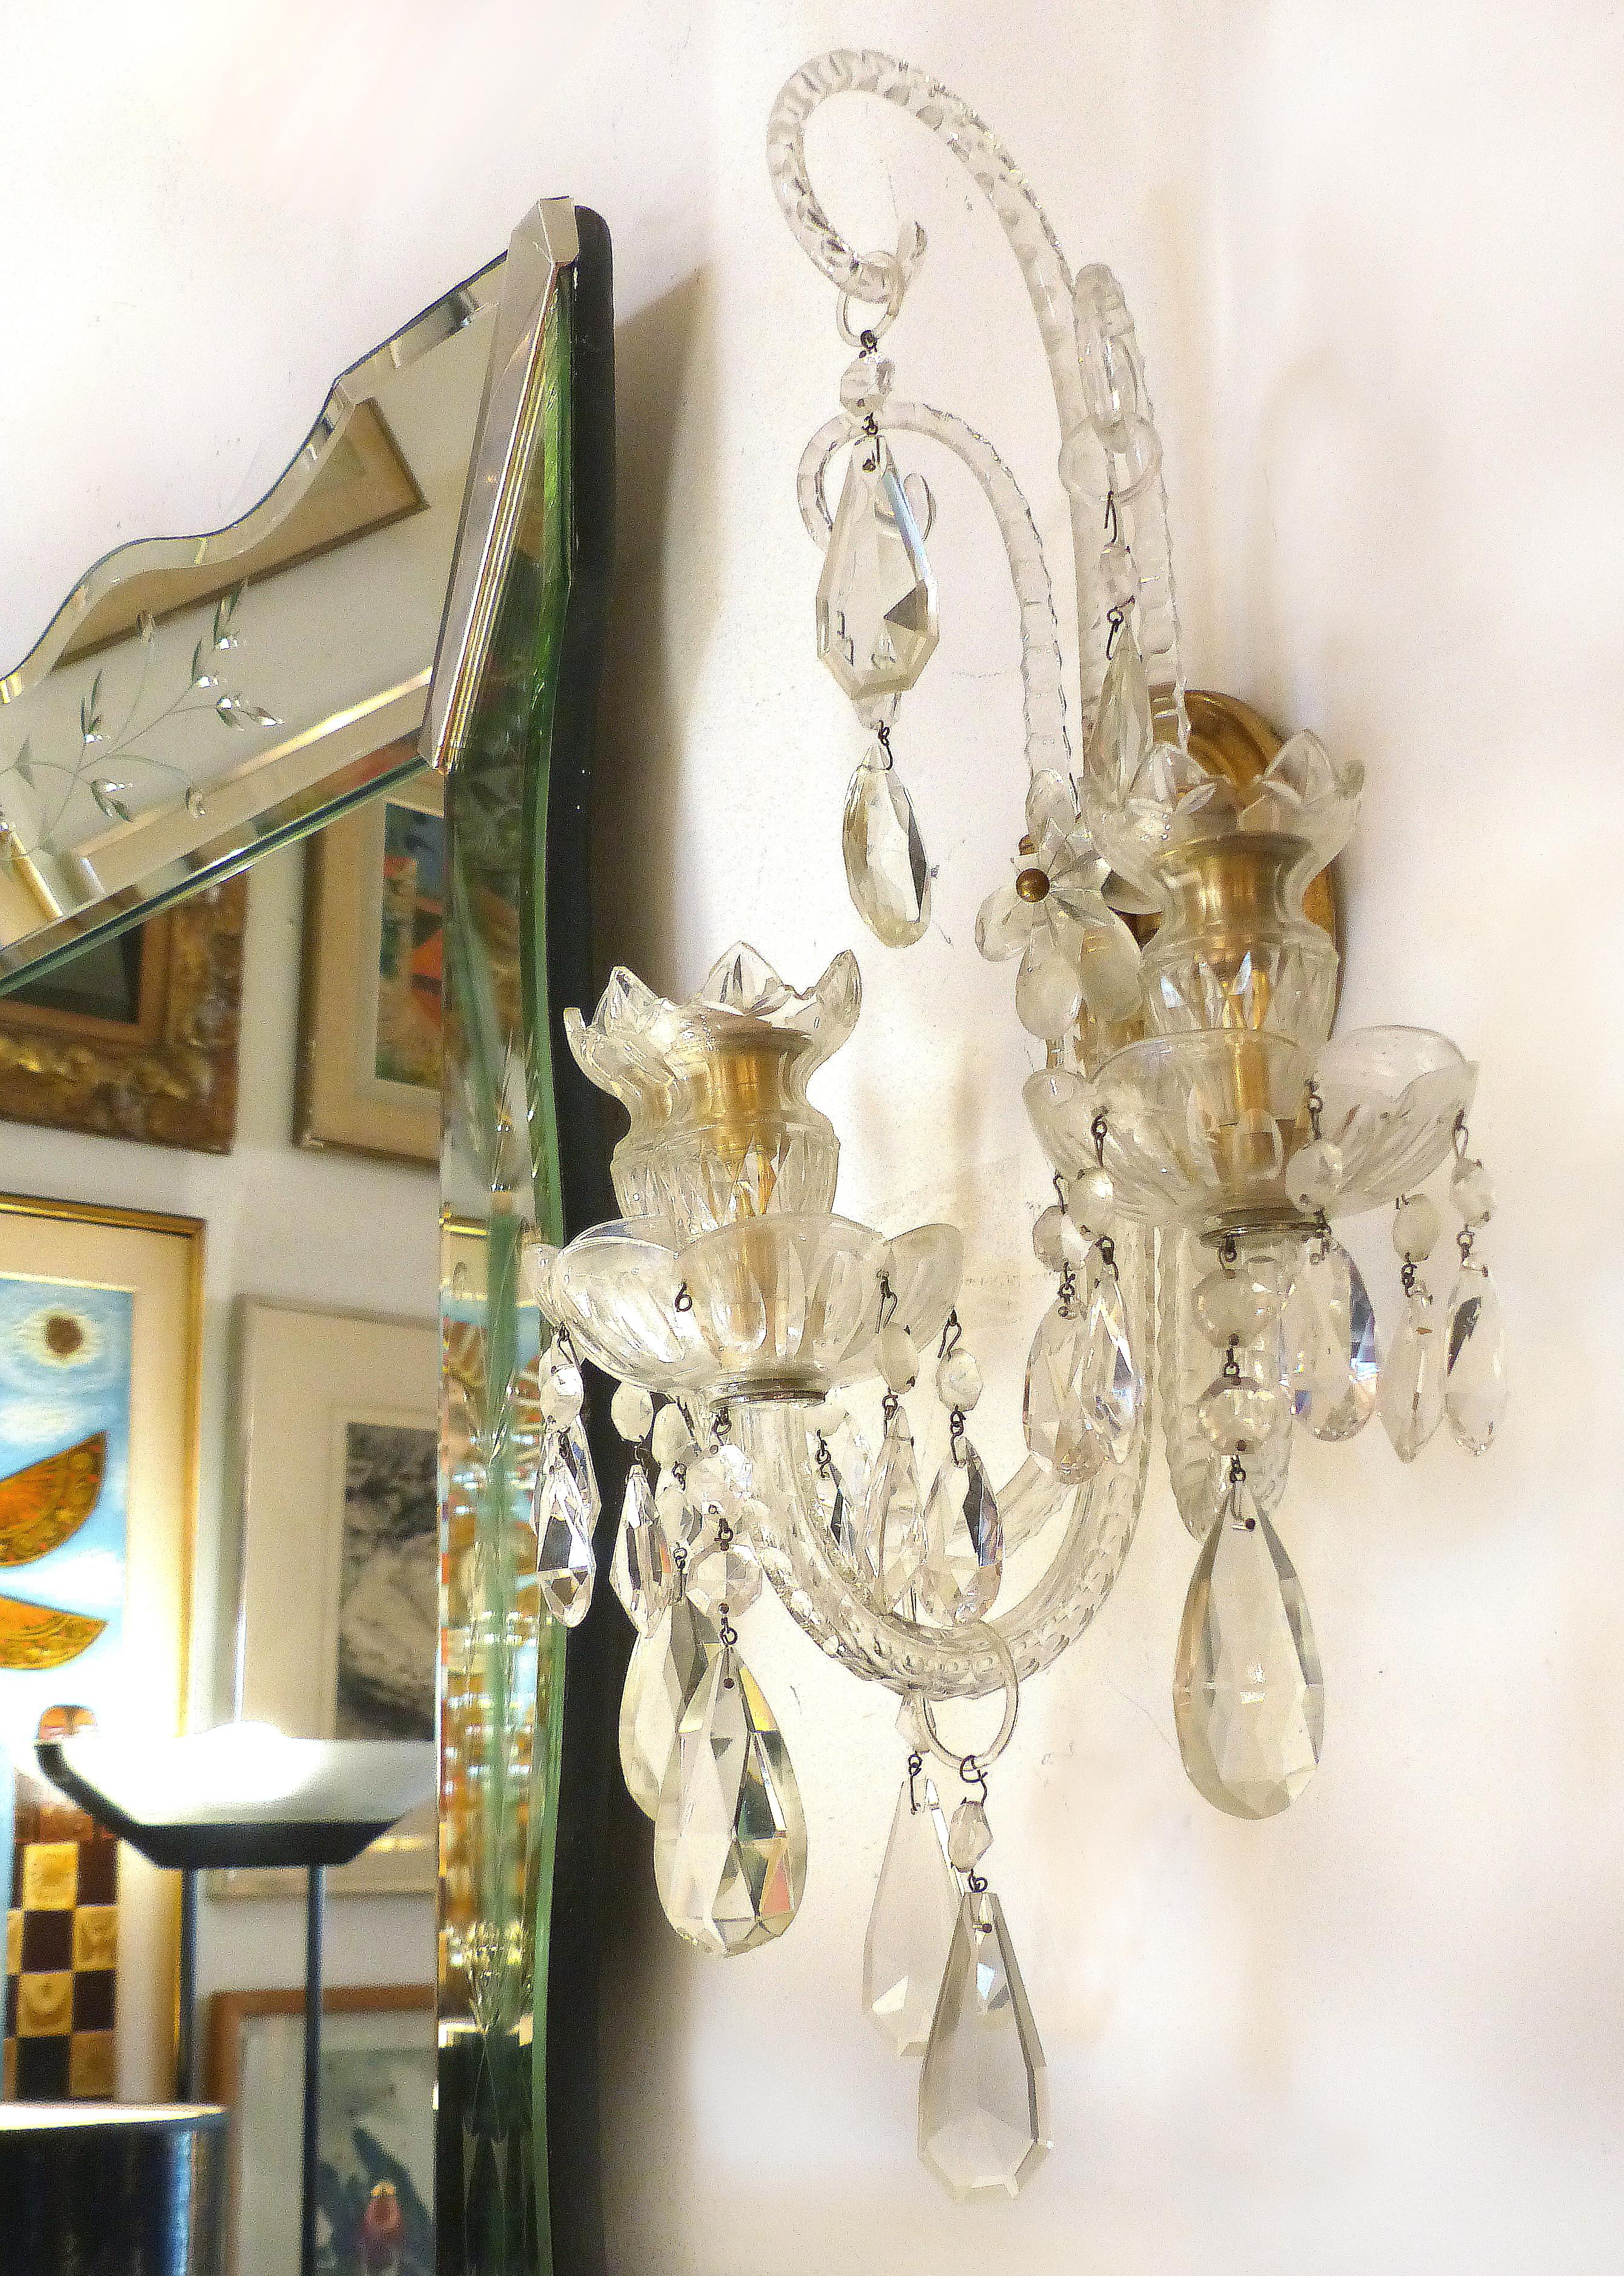 Crystal and Bronze 1940s 3-Arm Original Candle Sconces

Offered for sale is a fine pair of elegant crystal and bronze original candle three-arm wall sconces from the 1940s. The sconces have cut-glass decorated arms with crystal drops. There are